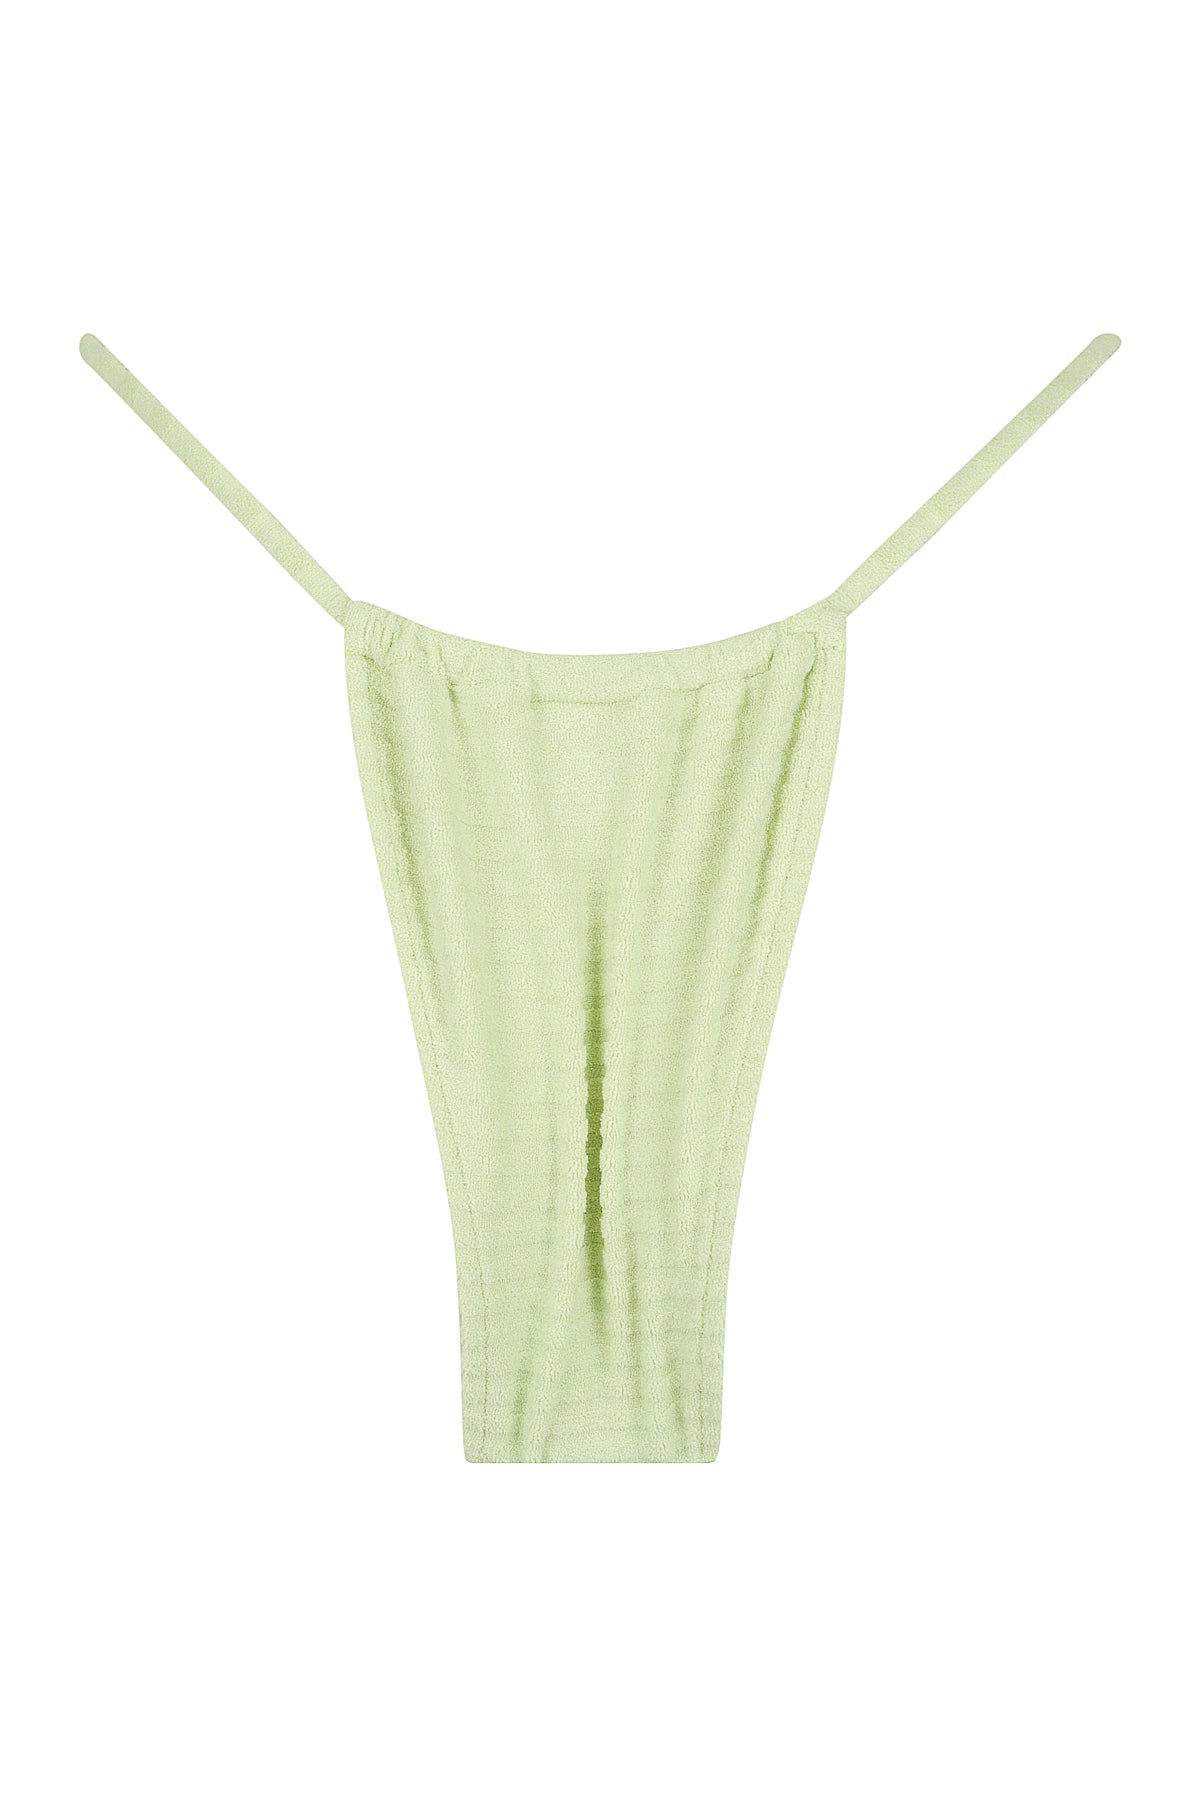 Lucerne Bottom - Lily Green Ribbed Terry